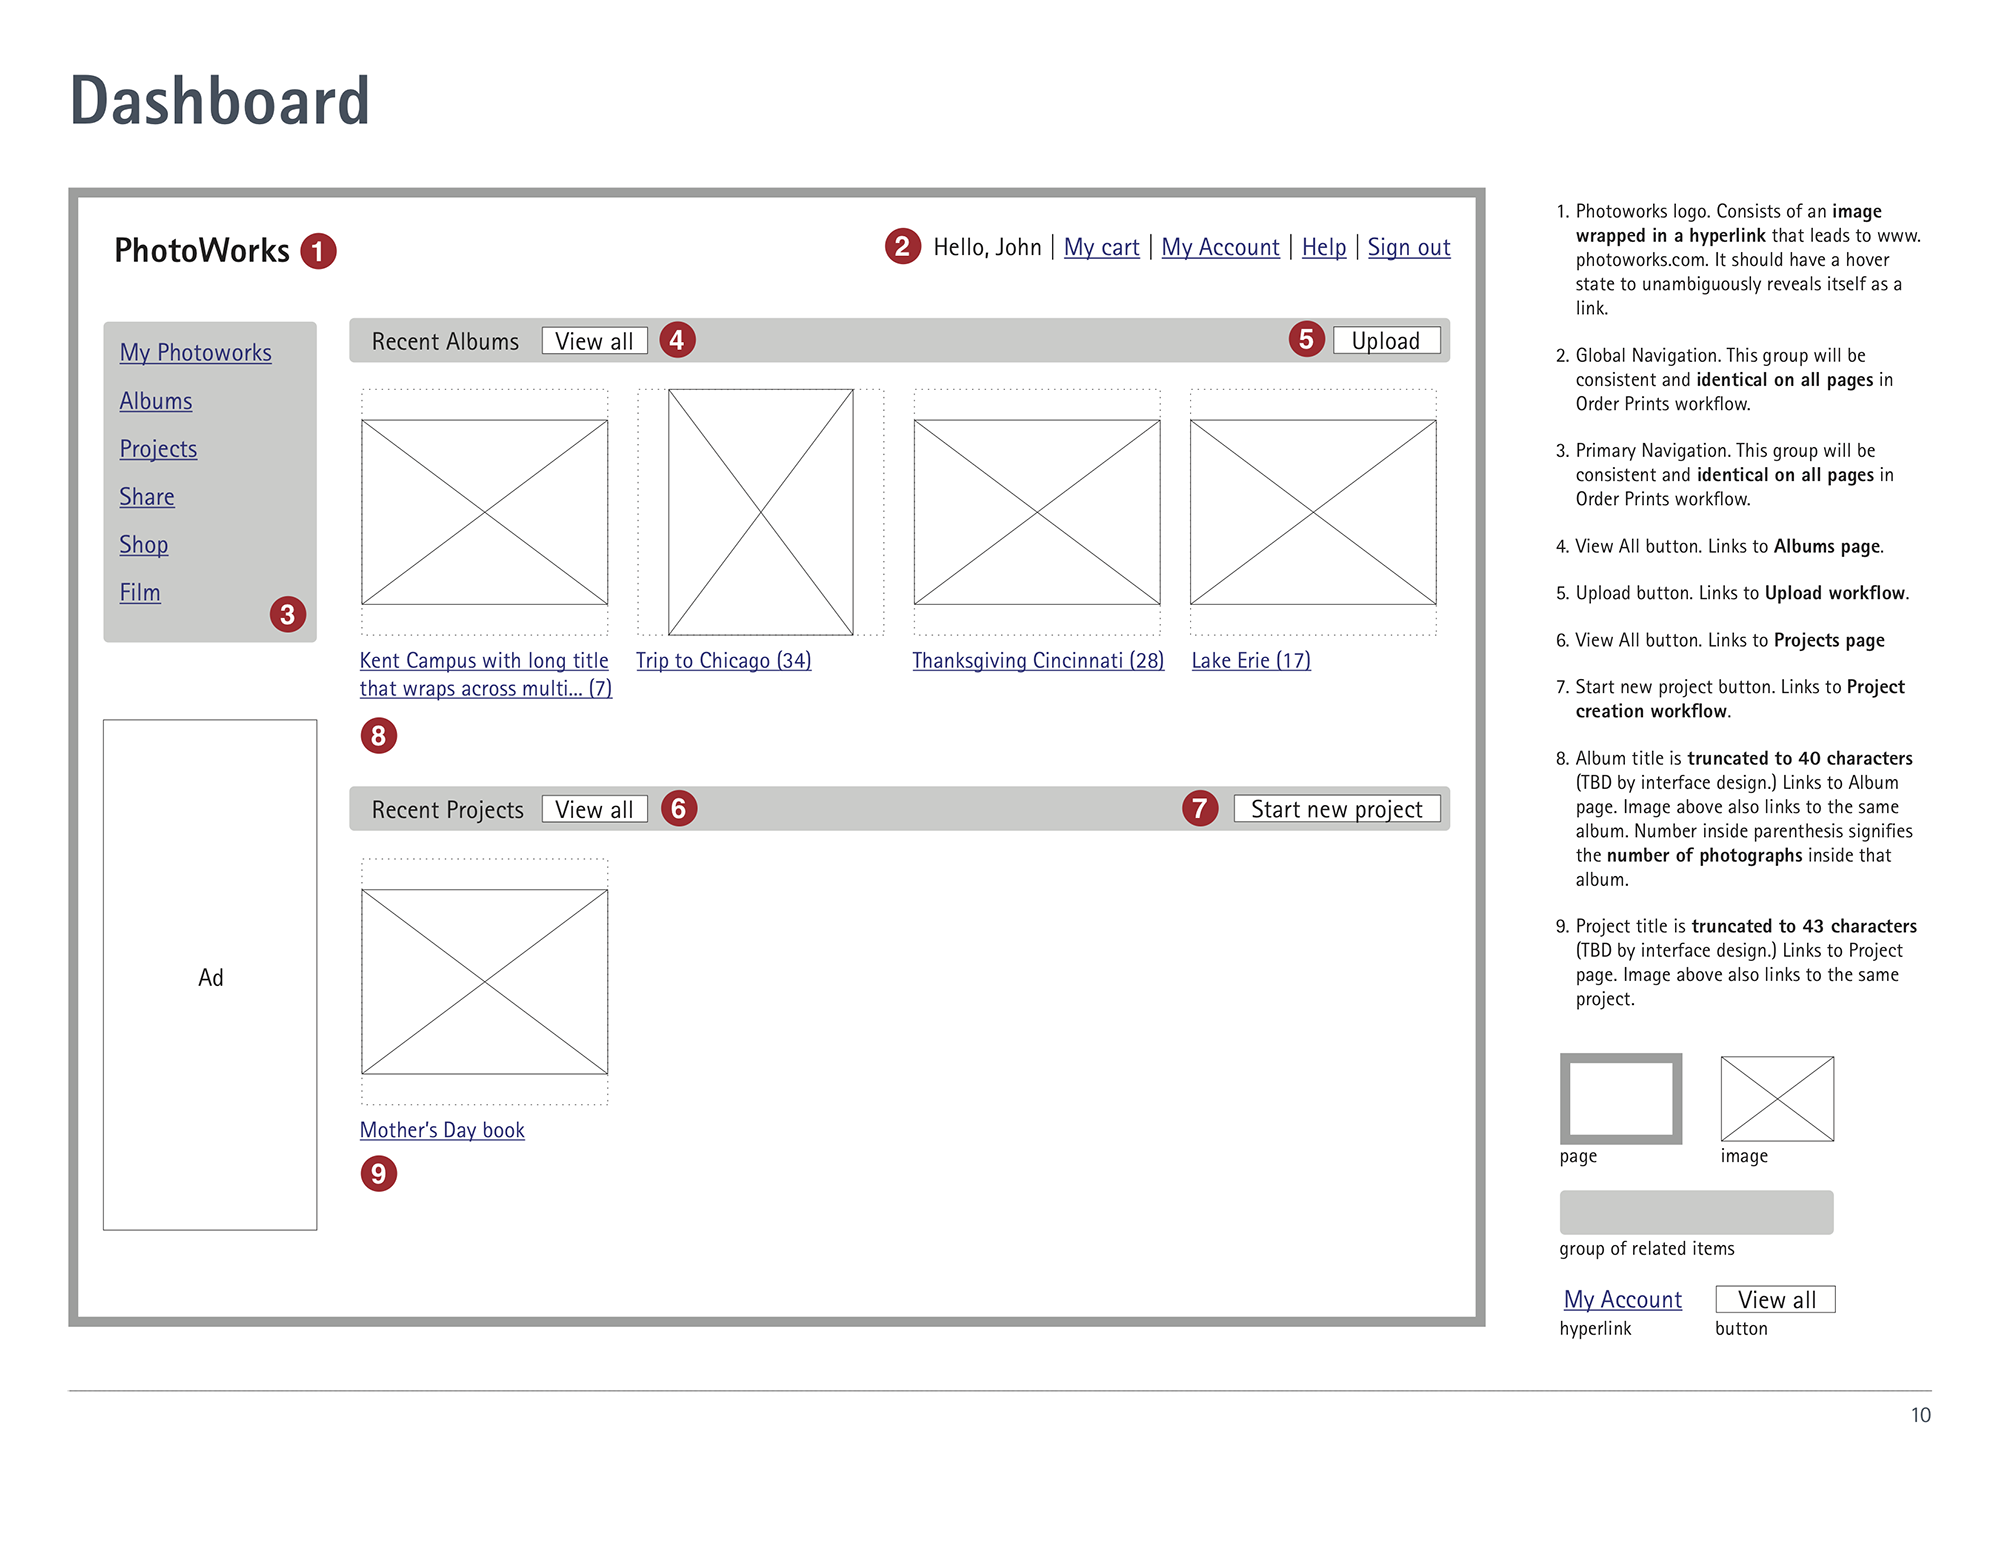 Wireframe for the dashboard